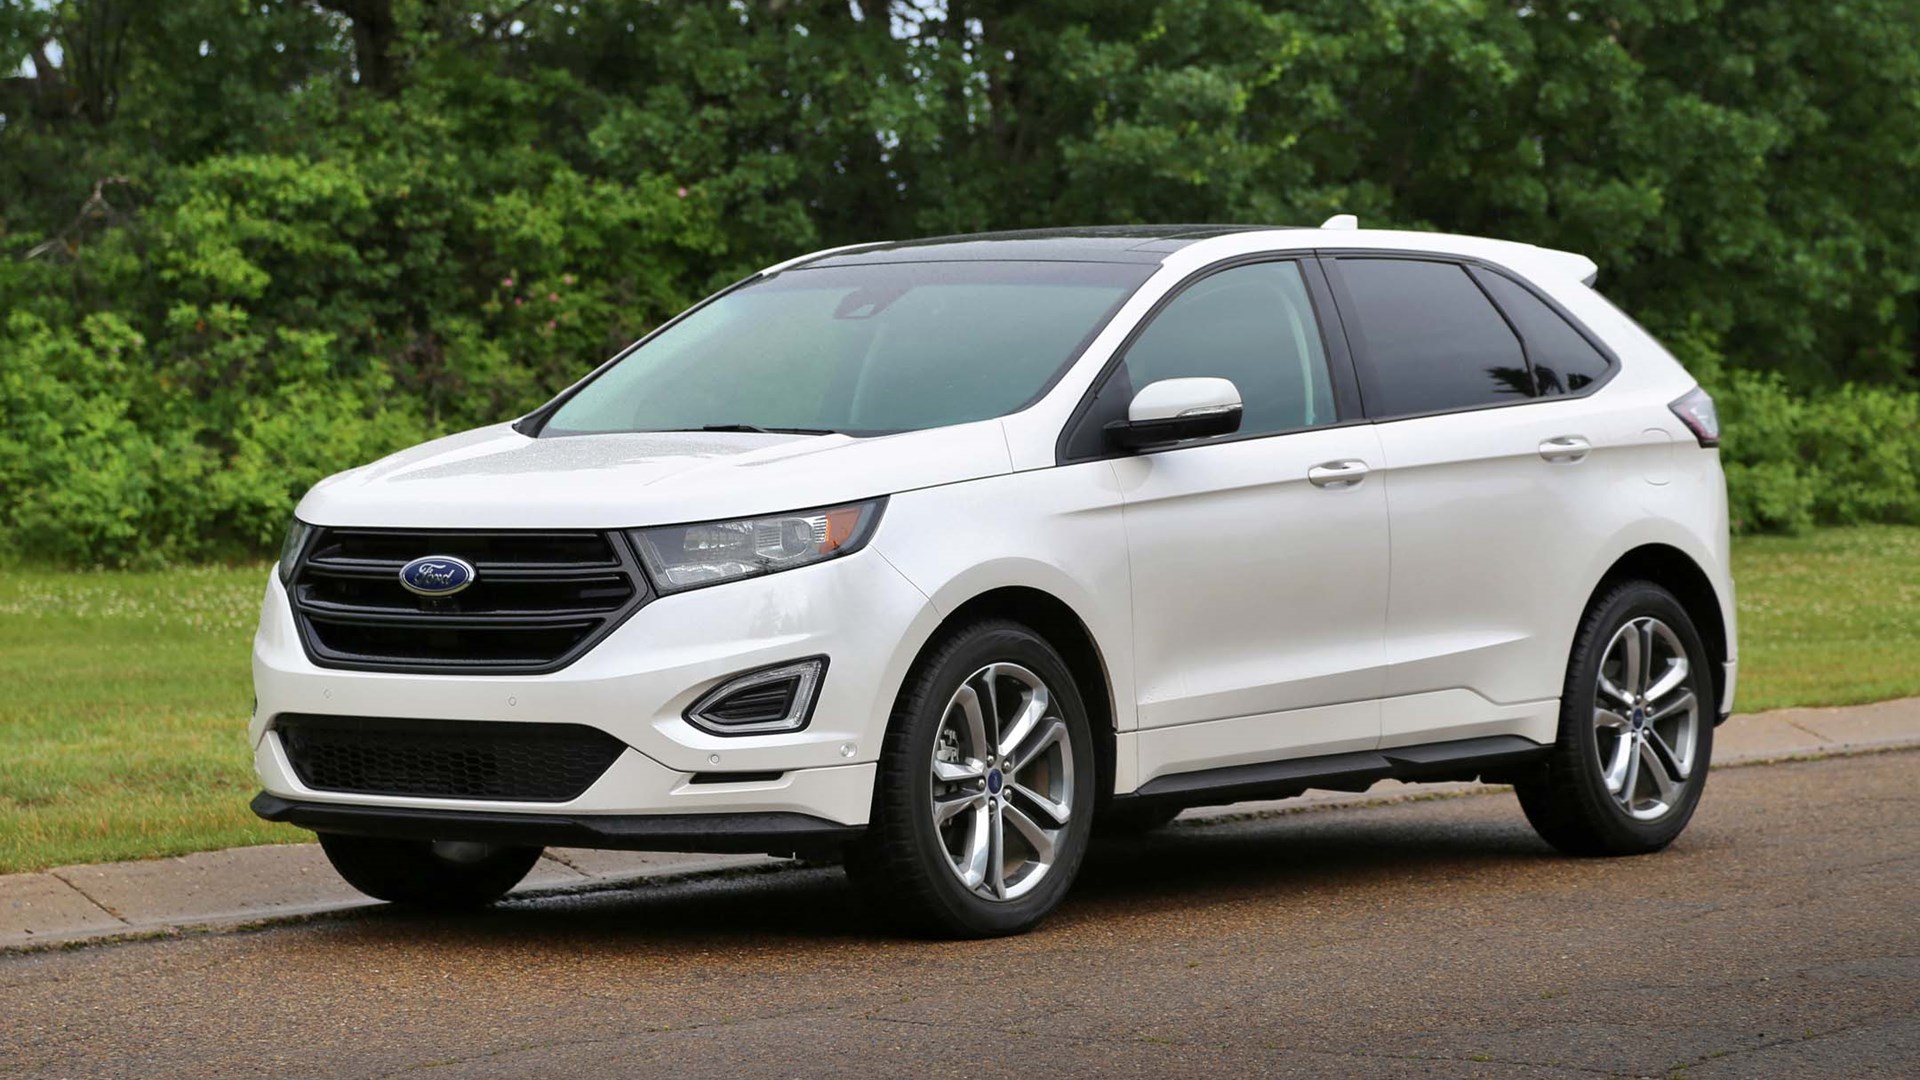 2017 Ford Edge Test Drive Review | AutoTrader.ca